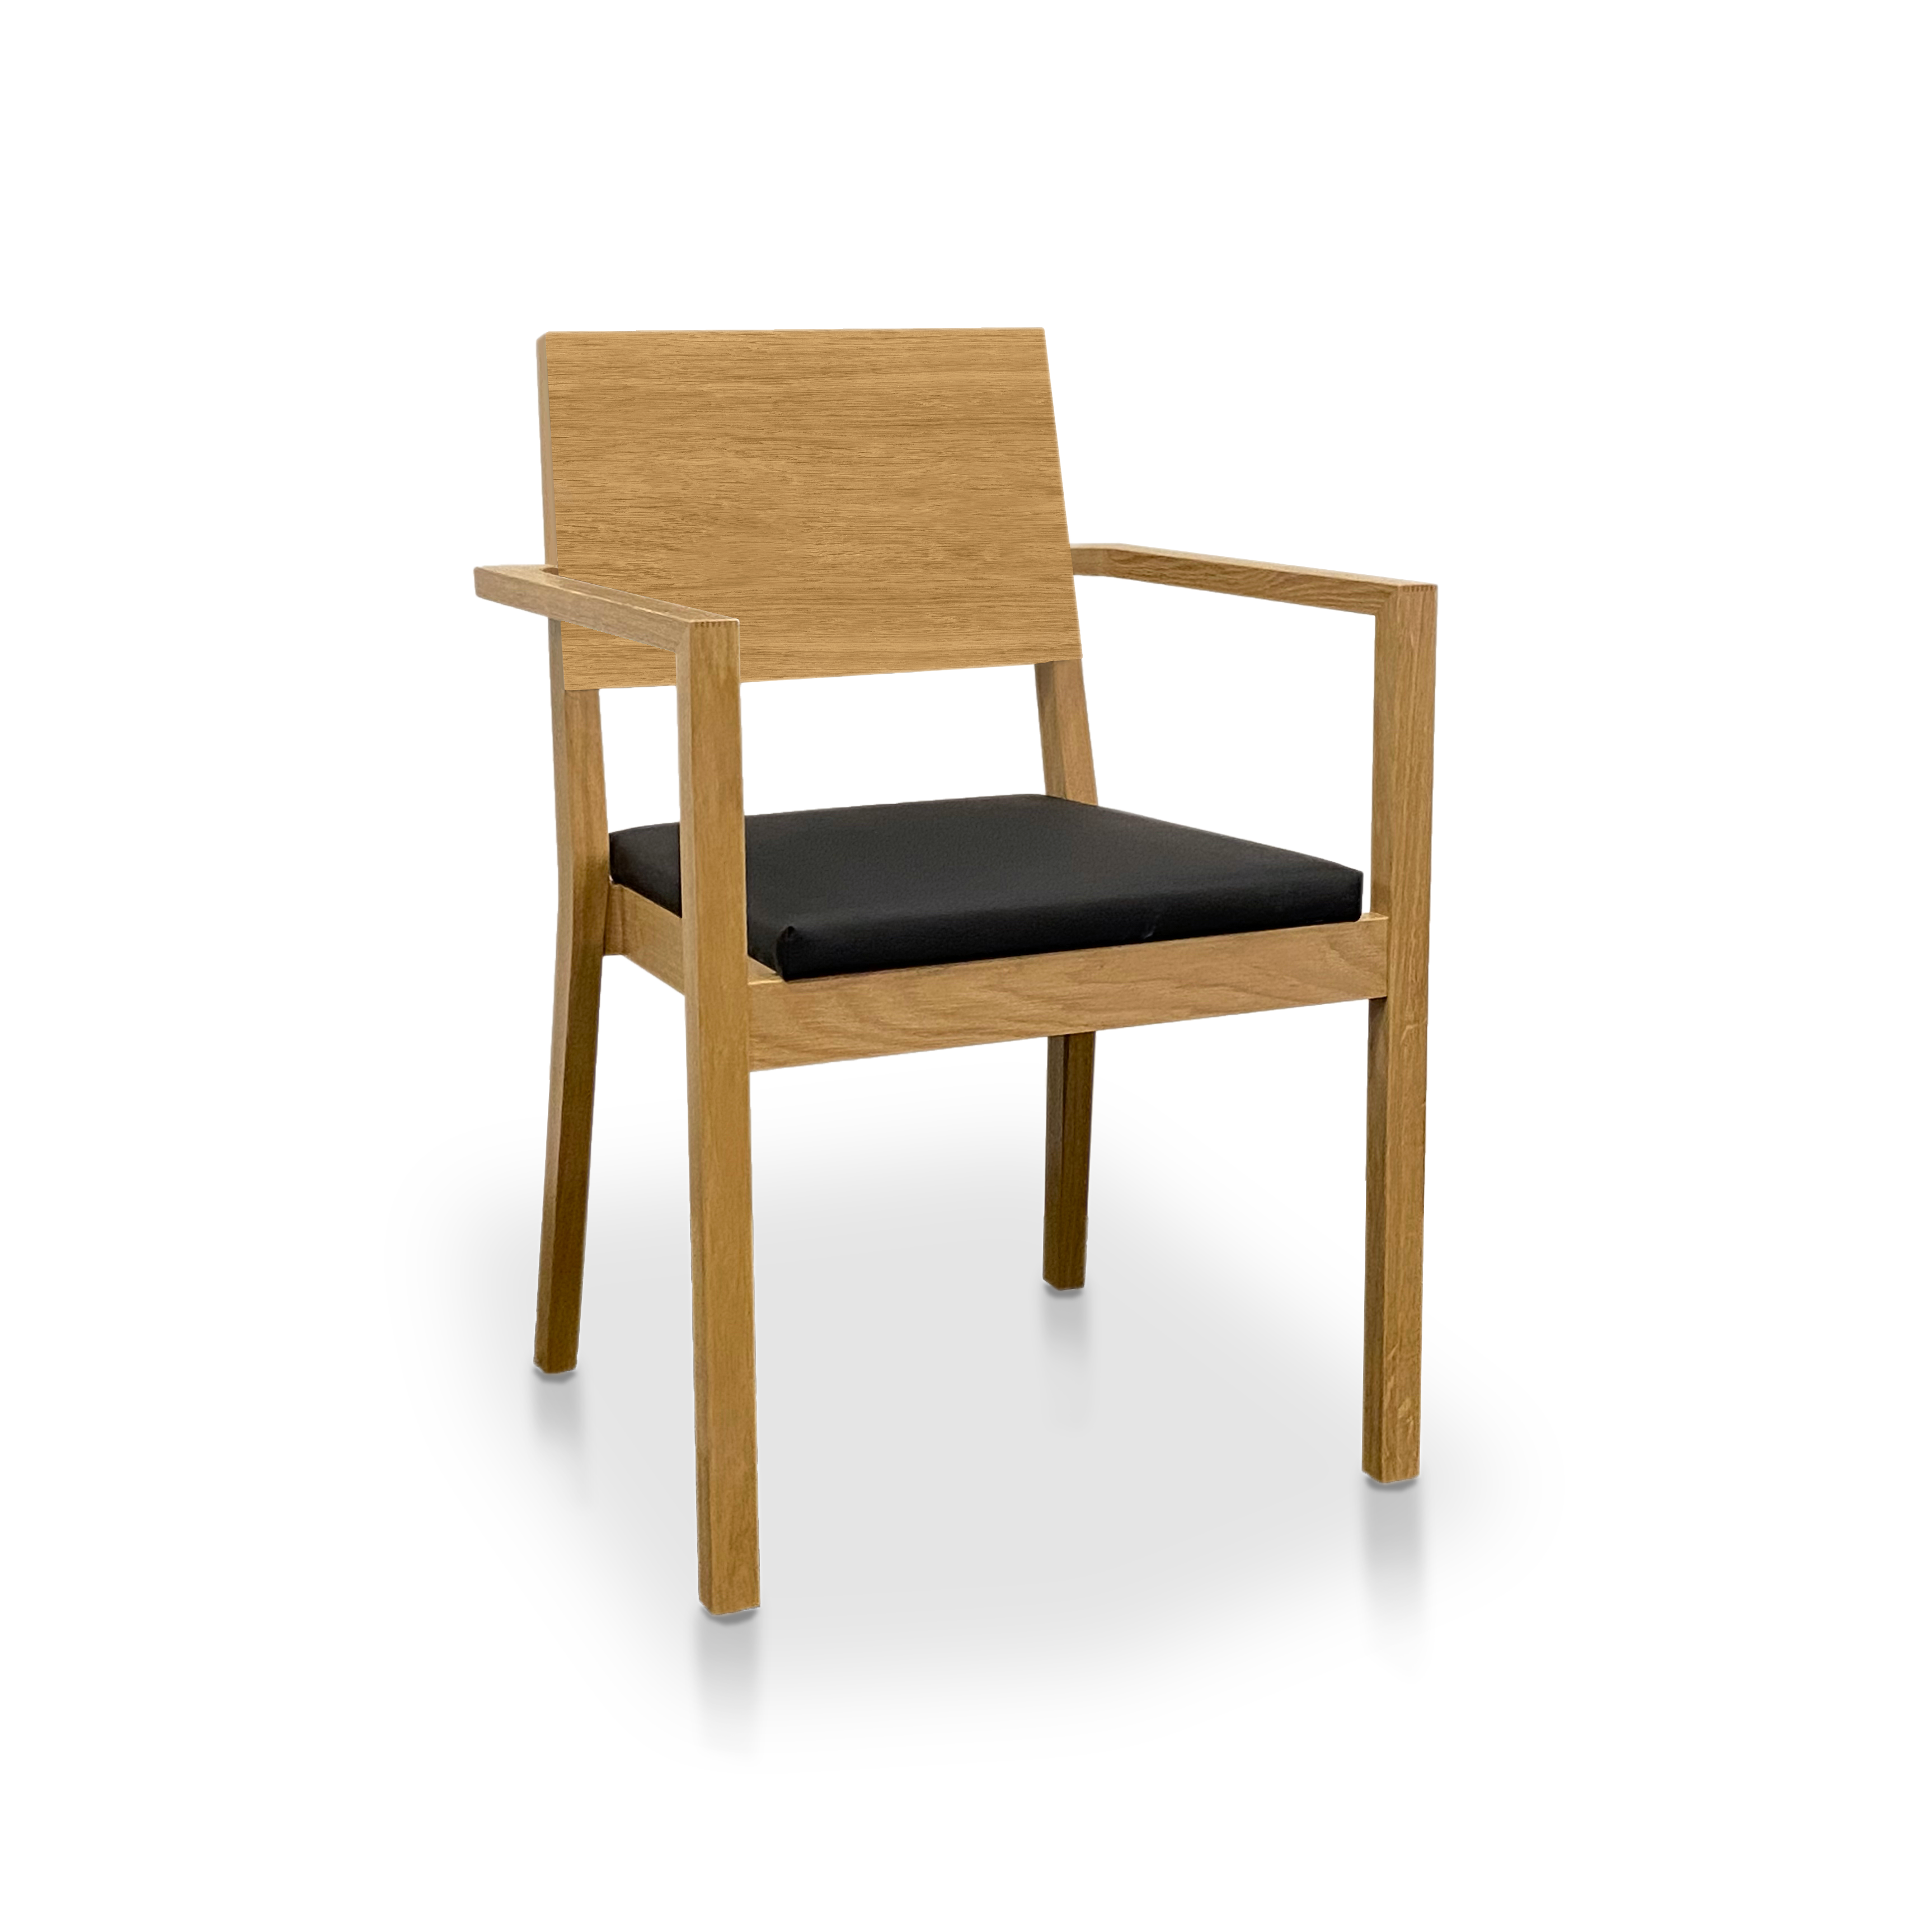 Lavabis classic stacking chair